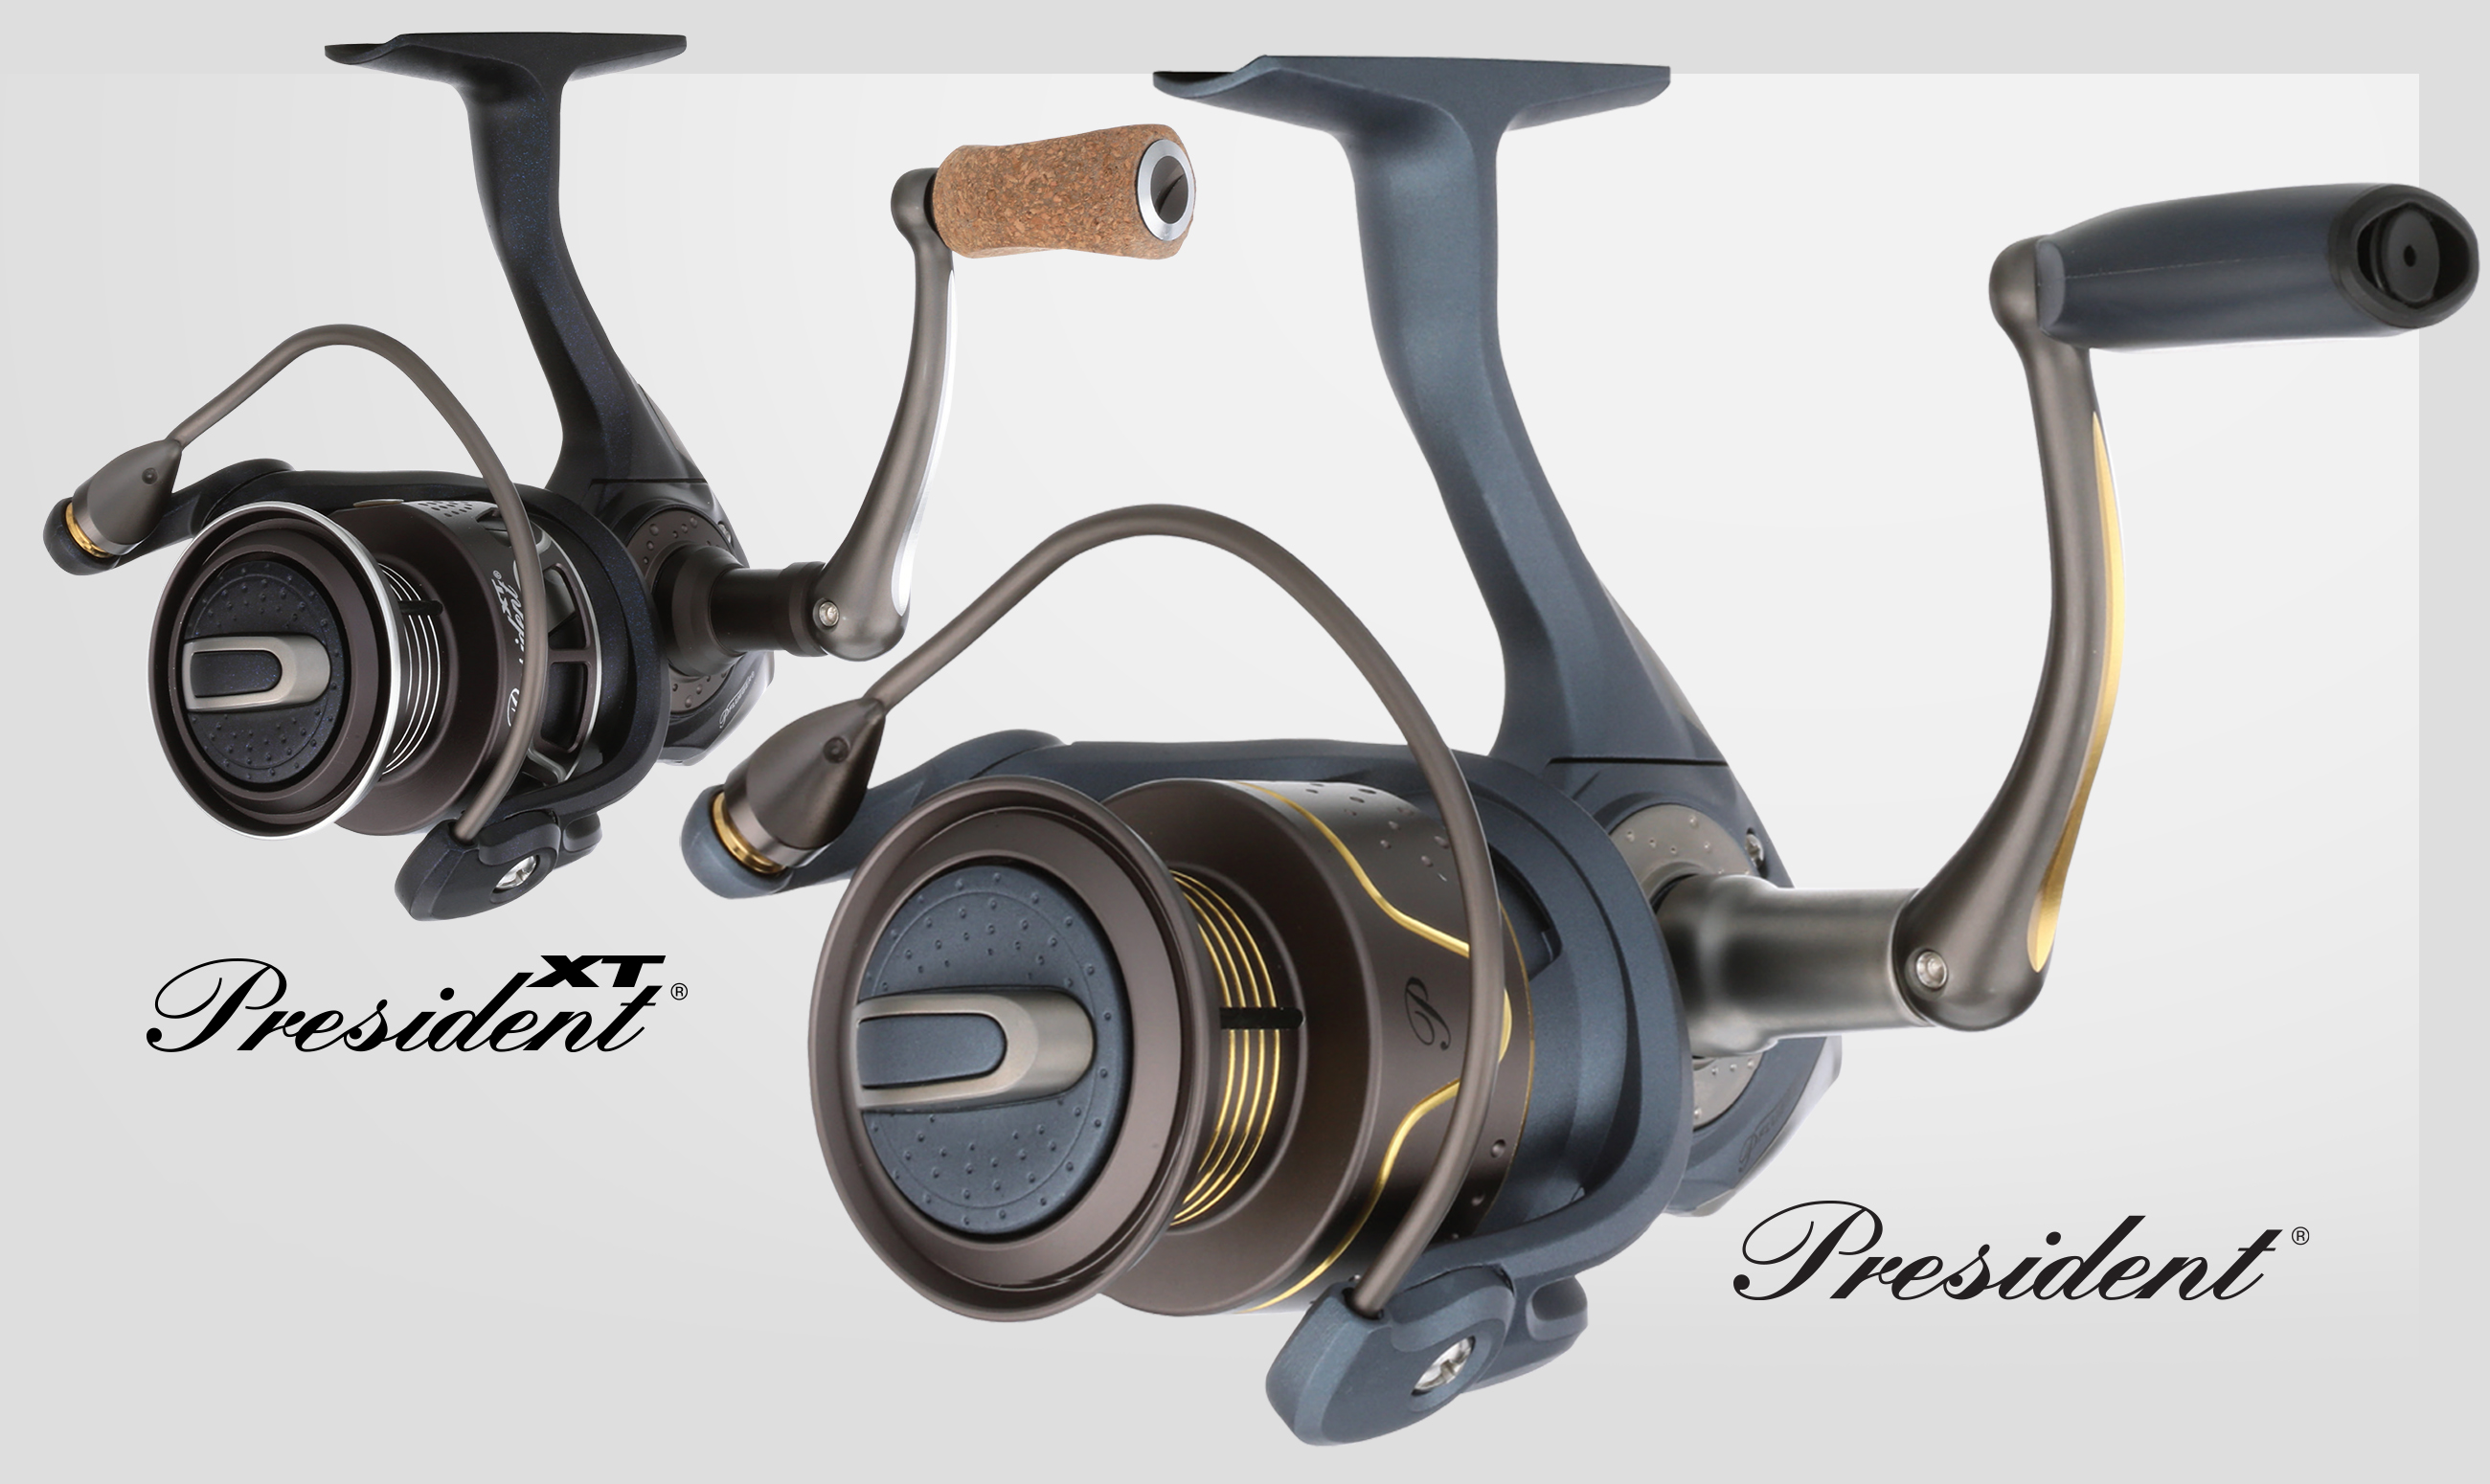 Pflueger Fishing Reels - We offer Thousands of Alternative Top Brand  Fishing Reels at great discounts everyday.